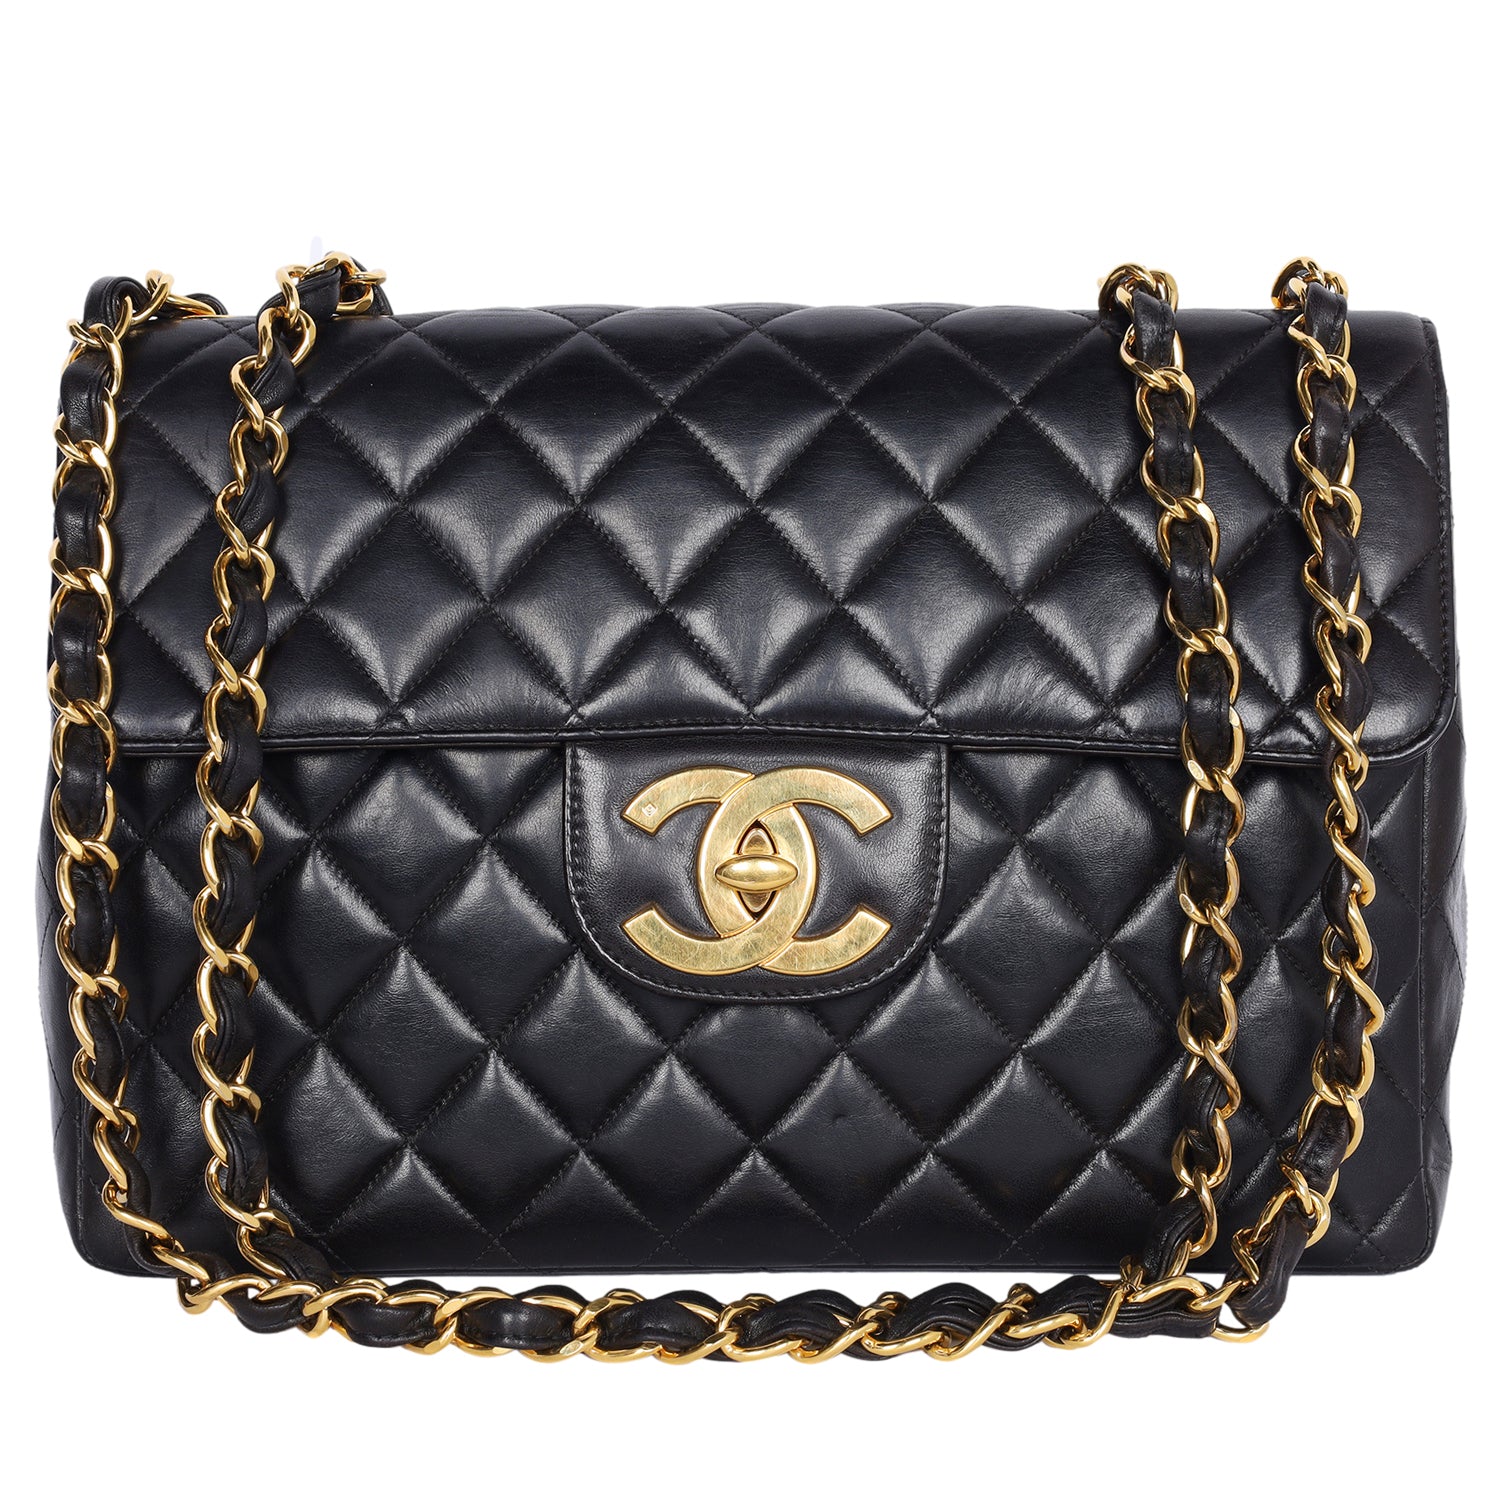 Vintage Chanel Black Quilted Jumbo Classic Bag (Authentic Pre-Own – The Lady Bag